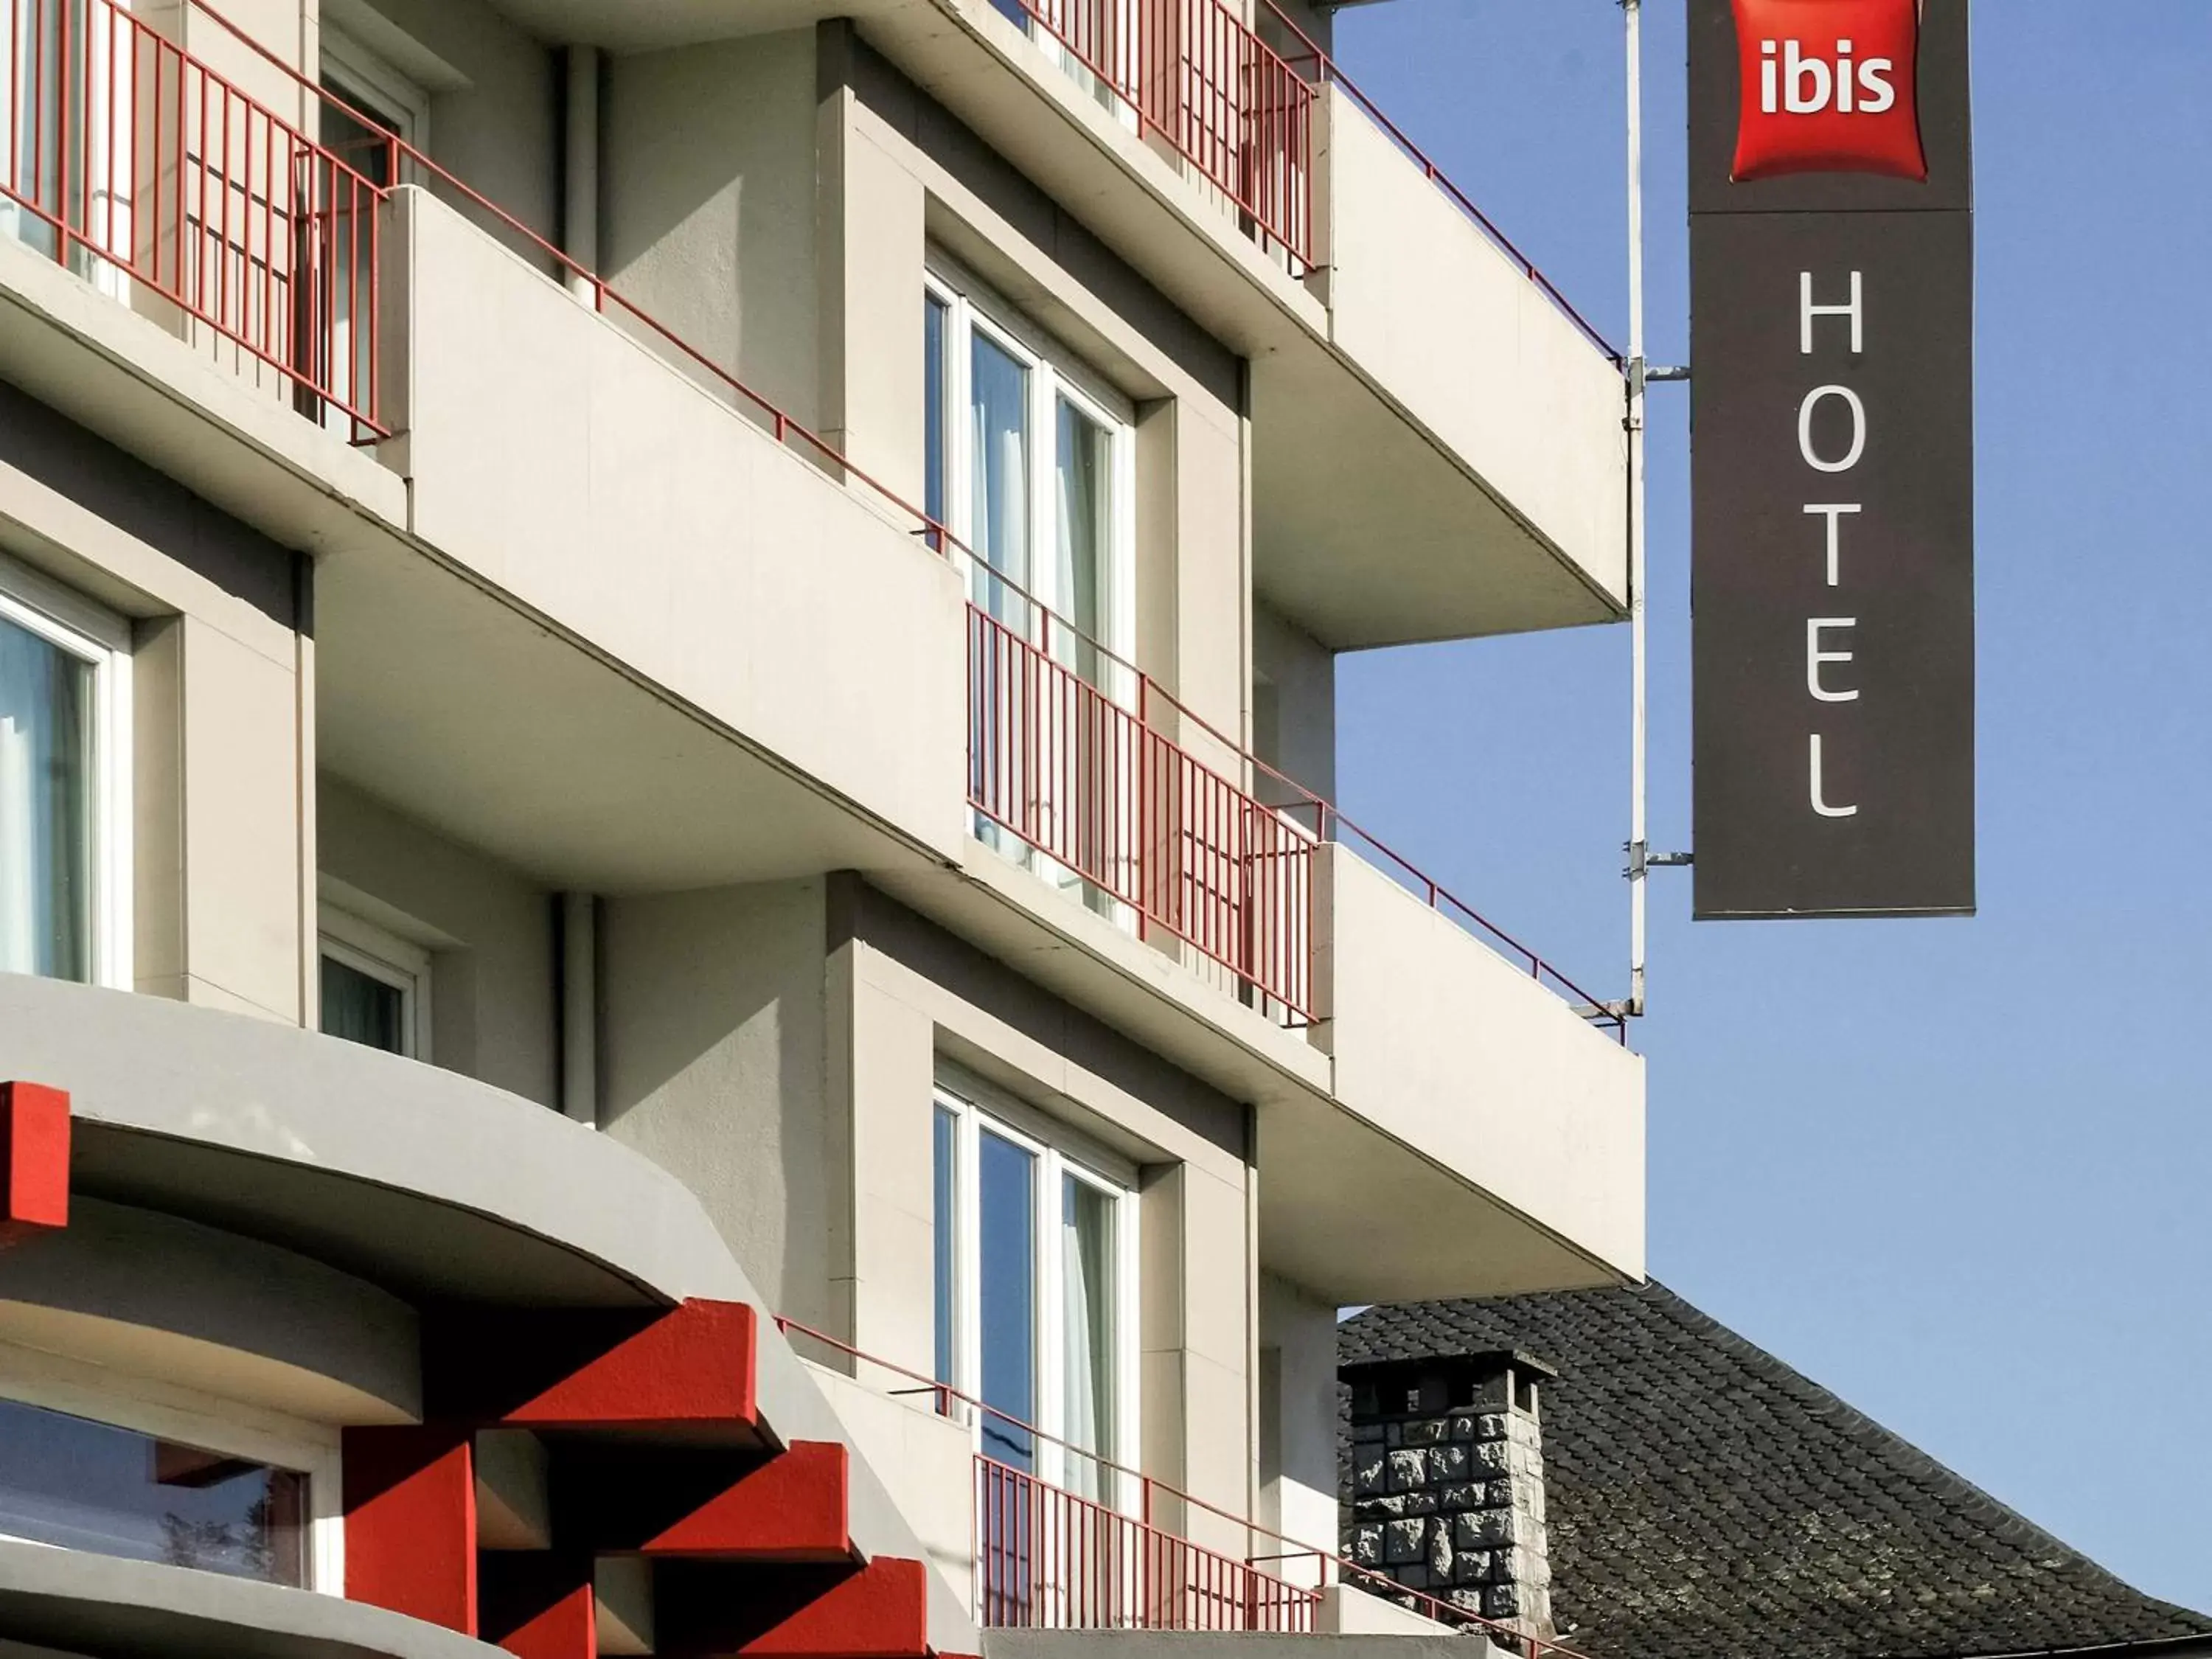 Property Building in Ibis Brive Centre